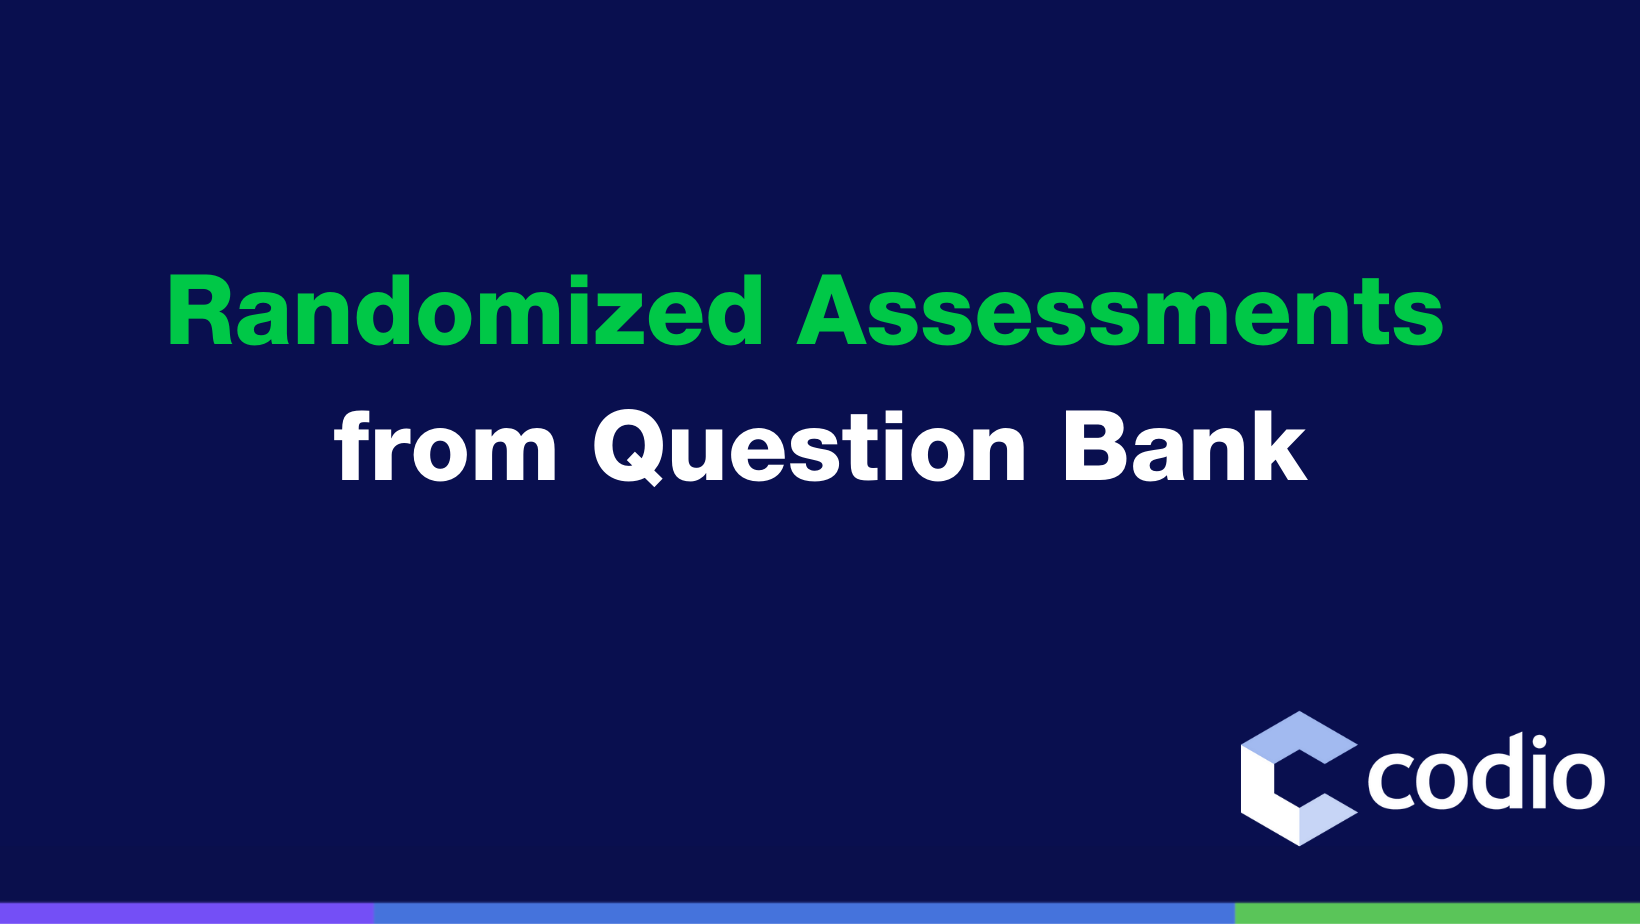 Randomized Assessments from Question Bank